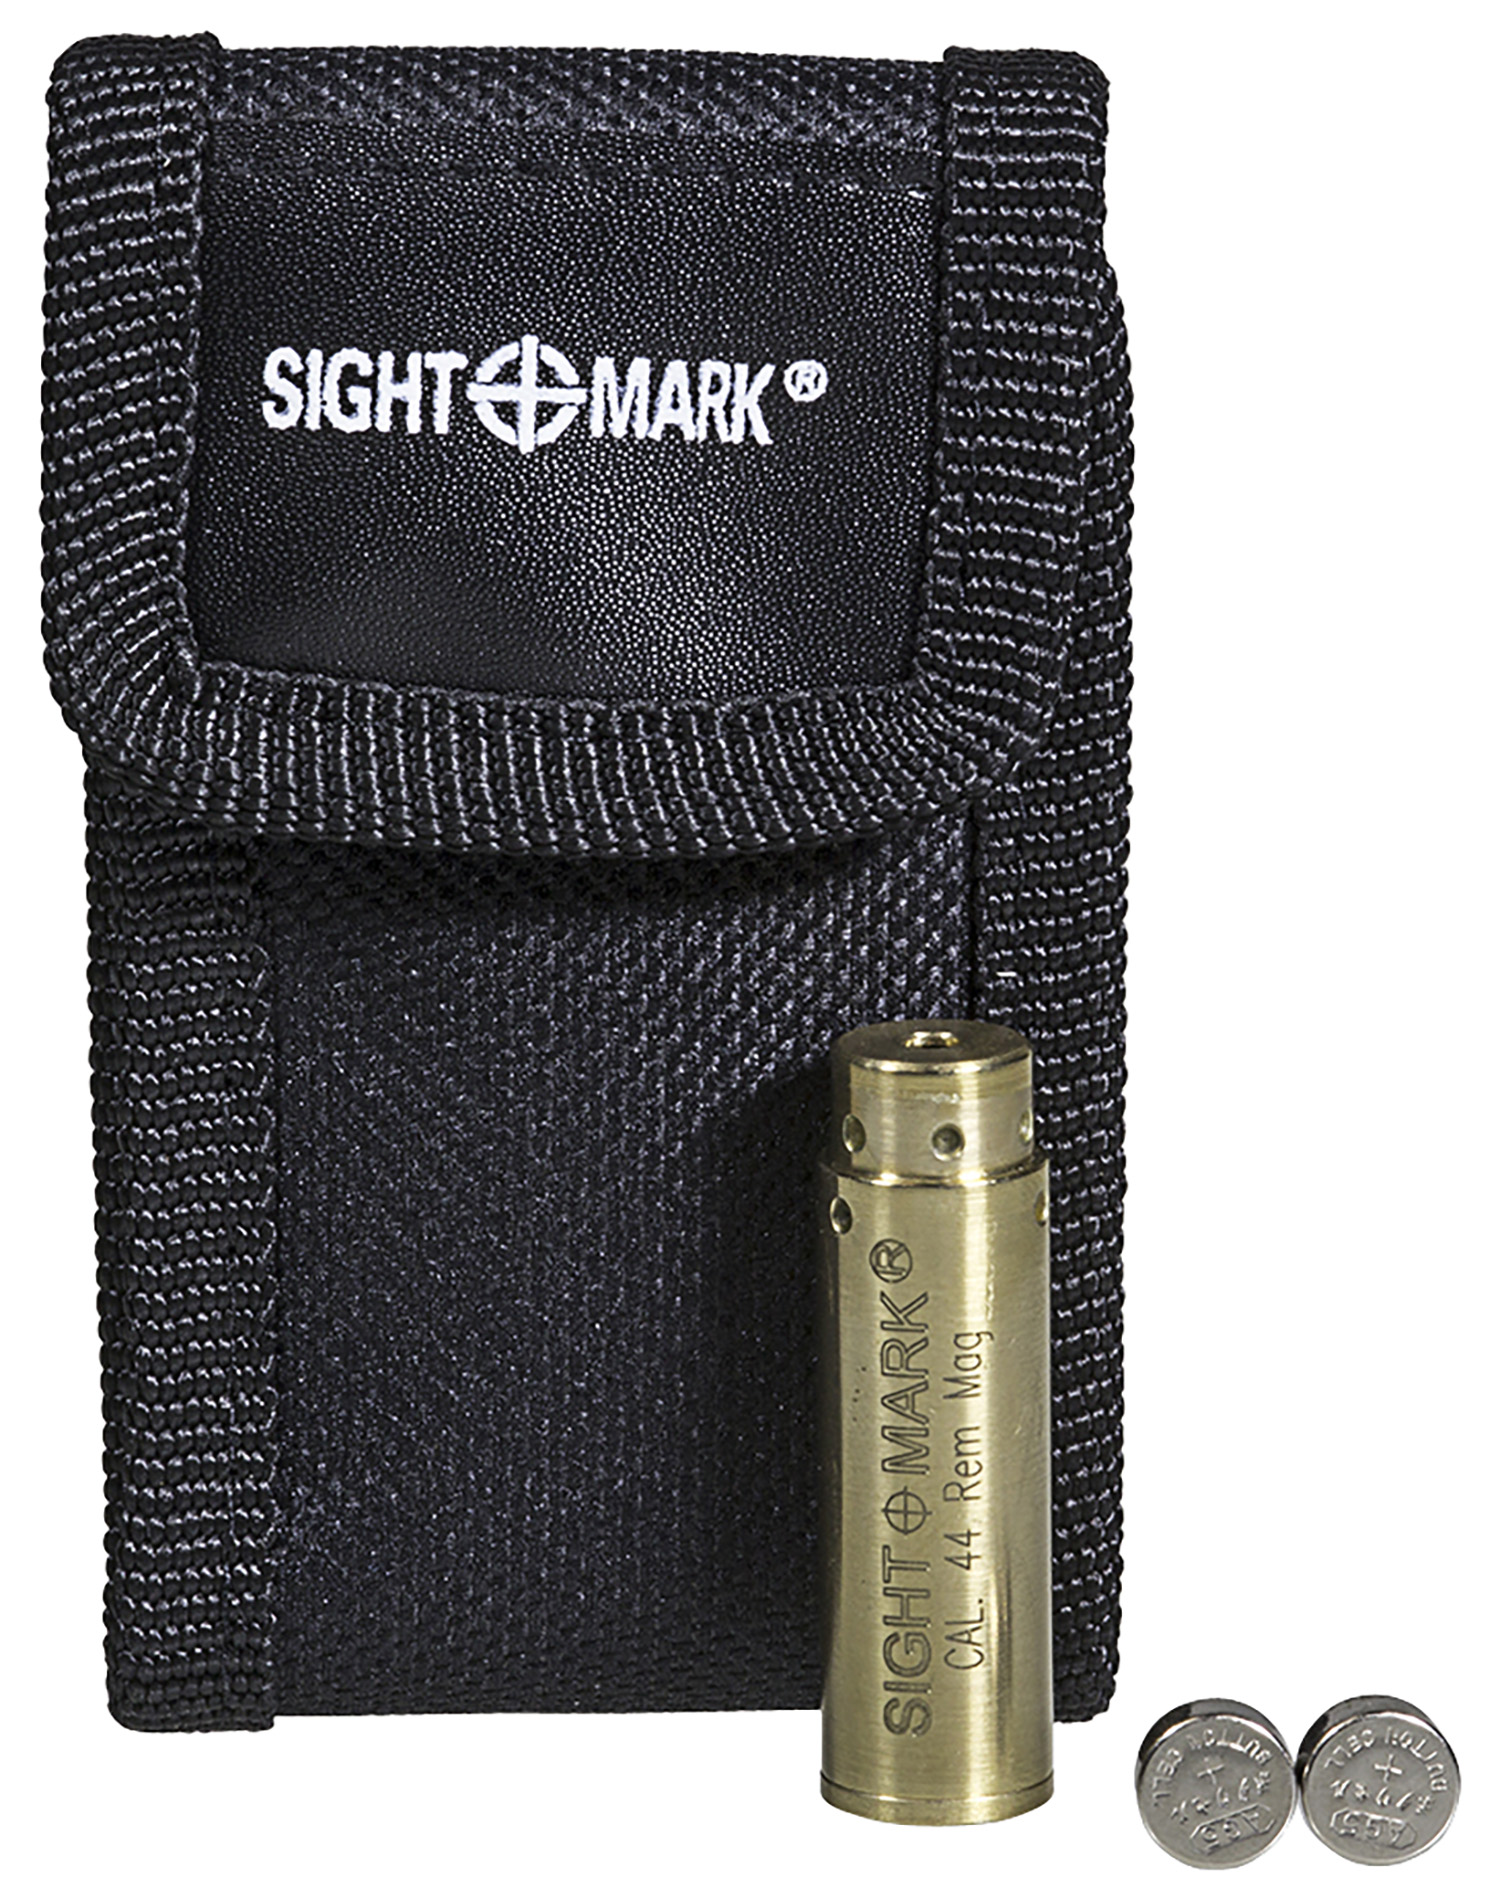 Sightmark SM39020 Boresight Red Laser for 22-250 Rem, 6.5 Creedmoor Brass  Includes Battery Pack & Carrying Case